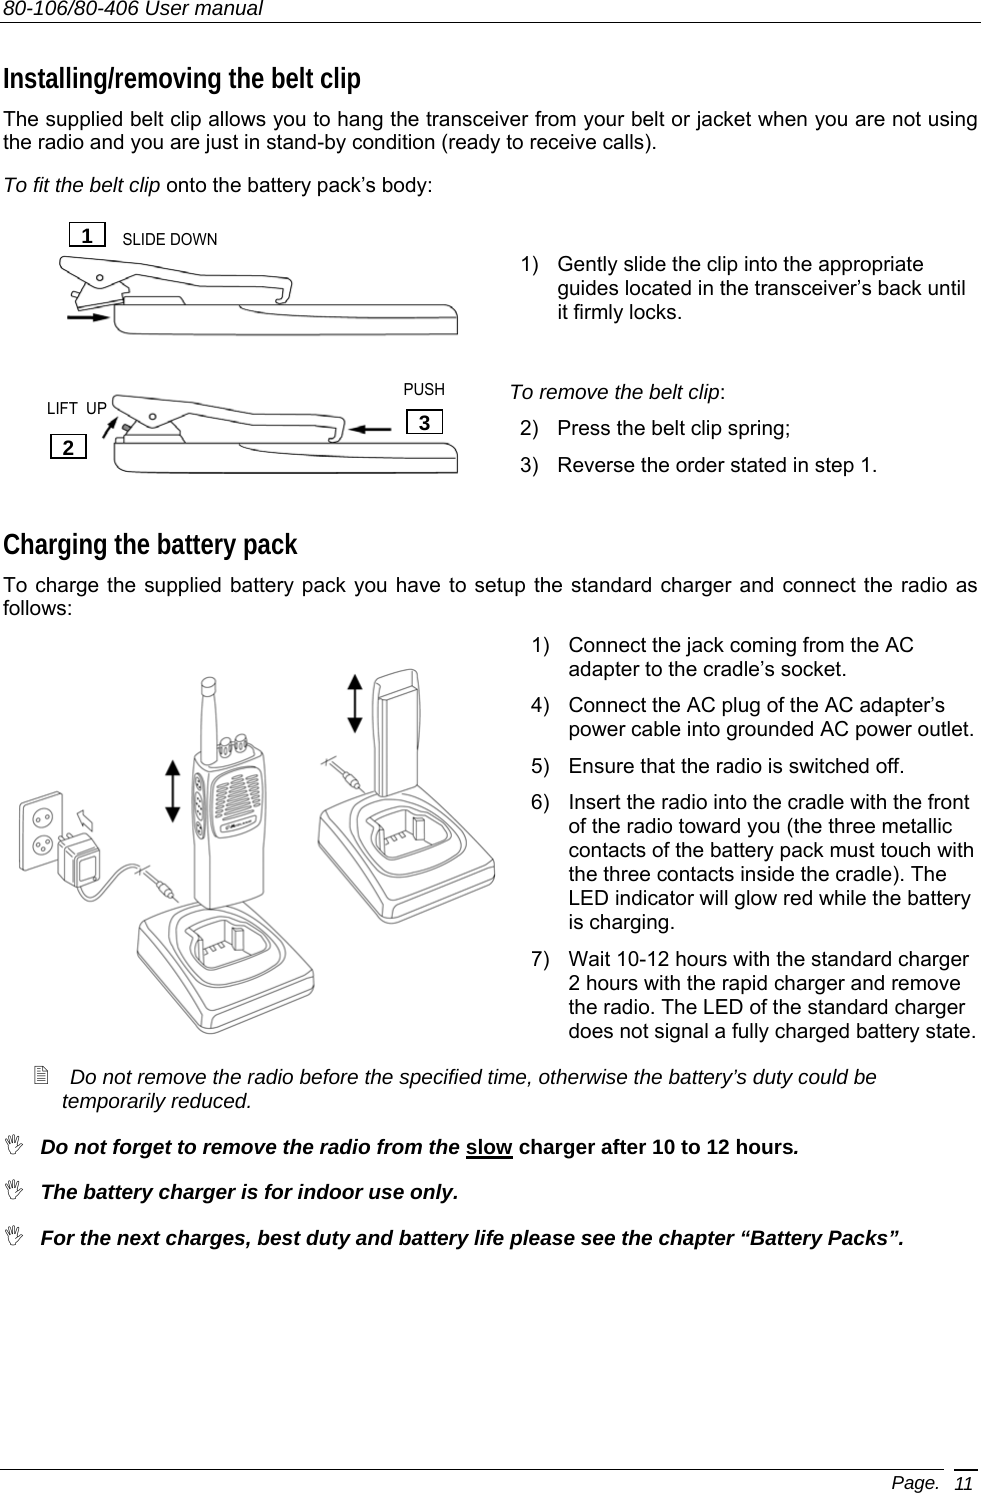 80-106/80-406 User manual Page. 11 Installing/removing the belt clip The supplied belt clip allows you to hang the transceiver from your belt or jacket when you are not using the radio and you are just in stand-by condition (ready to receive calls). To fit the belt clip onto the battery pack’s body:  1)  Gently slide the clip into the appropriate guides located in the transceiver’s back until it firmly locks.                                                                                          To remove the belt clip: 2)  Press the belt clip spring; 3)  Reverse the order stated in step 1. Charging the battery pack To charge the supplied battery pack you have to setup the standard charger and connect the radio as follows: 1)  Connect the jack coming from the AC adapter to the cradle’s socket. 4)  Connect the AC plug of the AC adapter’s power cable into grounded AC power outlet. 5)  Ensure that the radio is switched off. 6)  Insert the radio into the cradle with the front of the radio toward you (the three metallic contacts of the battery pack must touch with the three contacts inside the cradle). The LED indicator will glow red while the battery is charging. 7)  Wait 10-12 hours with the standard charger 2 hours with the rapid charger and remove the radio. The LED of the standard charger does not signal a fully charged battery state.  Do not remove the radio before the specified time, otherwise the battery’s duty could be temporarily reduced.  Do not forget to remove the radio from the slow charger after 10 to 12 hours.  The battery charger is for indoor use only.  For the next charges, best duty and battery life please see the chapter “Battery Packs”. 1 2  3SLIDE DOWN LIFT  UP PUSH